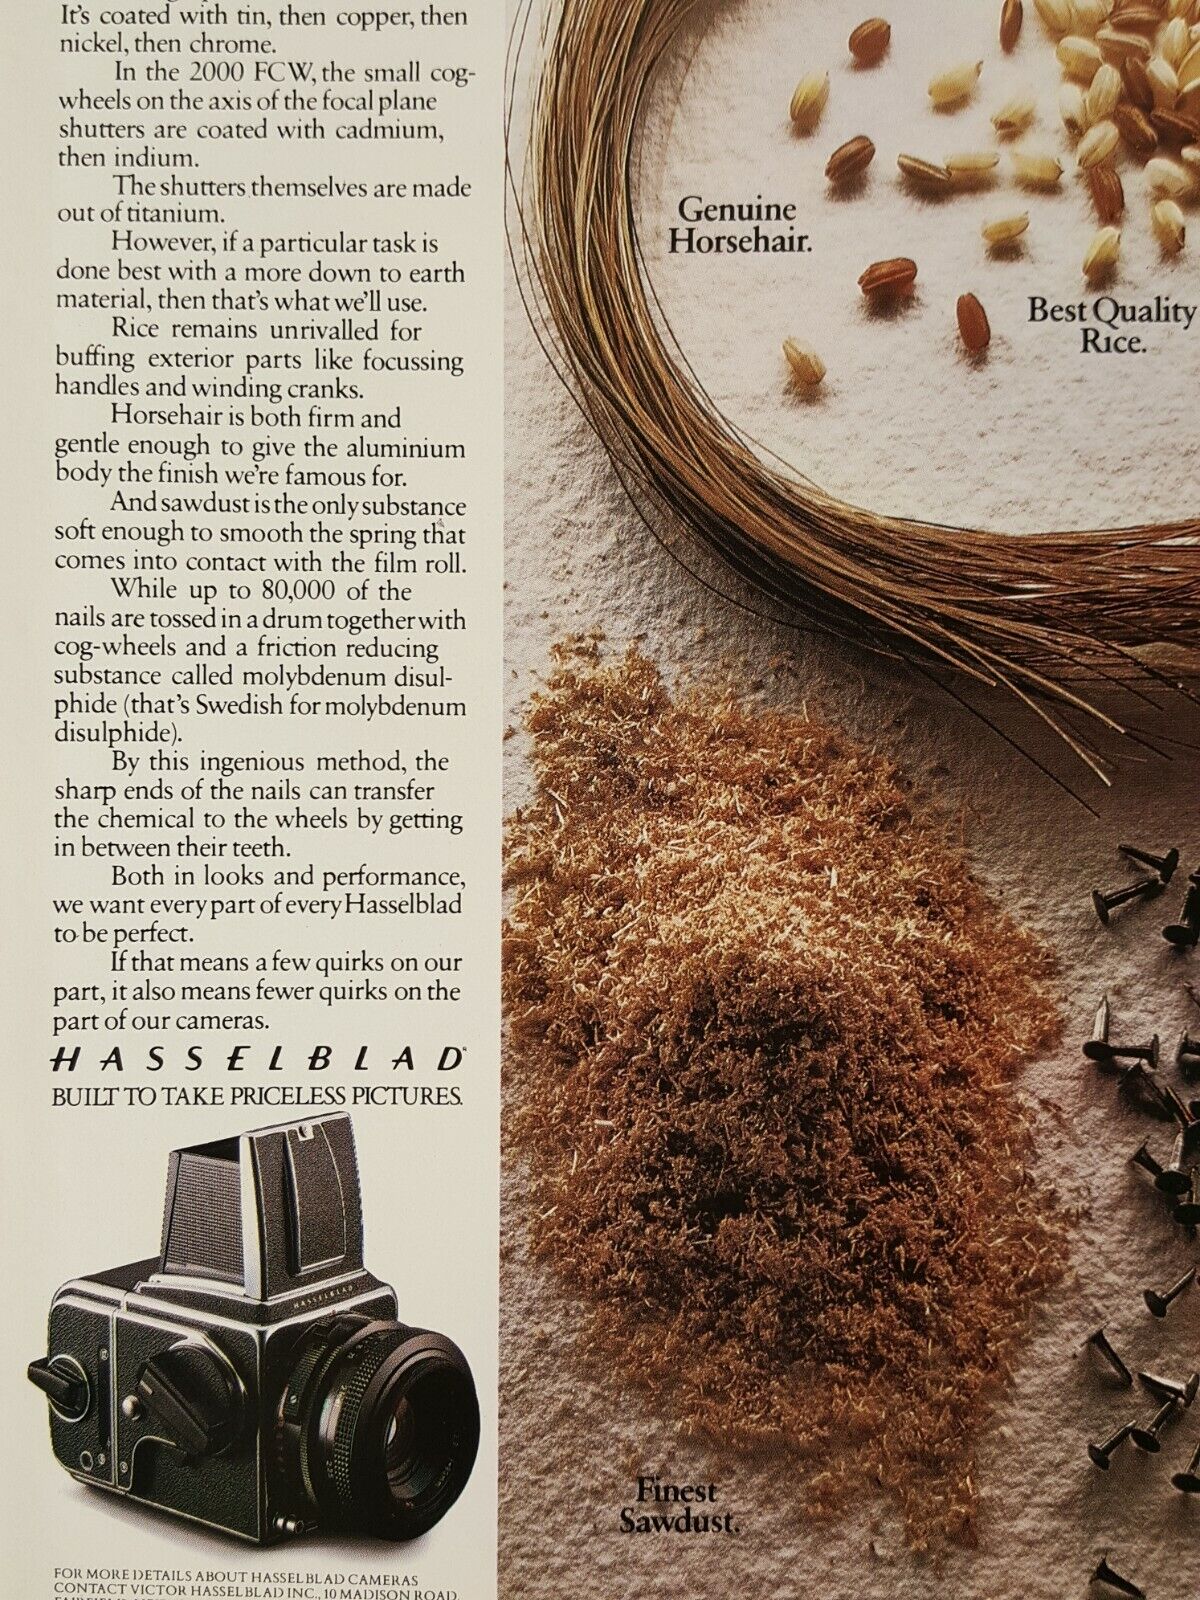 Print Ad Hasselblad Cameras Materials 1986 Vintage Advertising from Nat Geo Mag